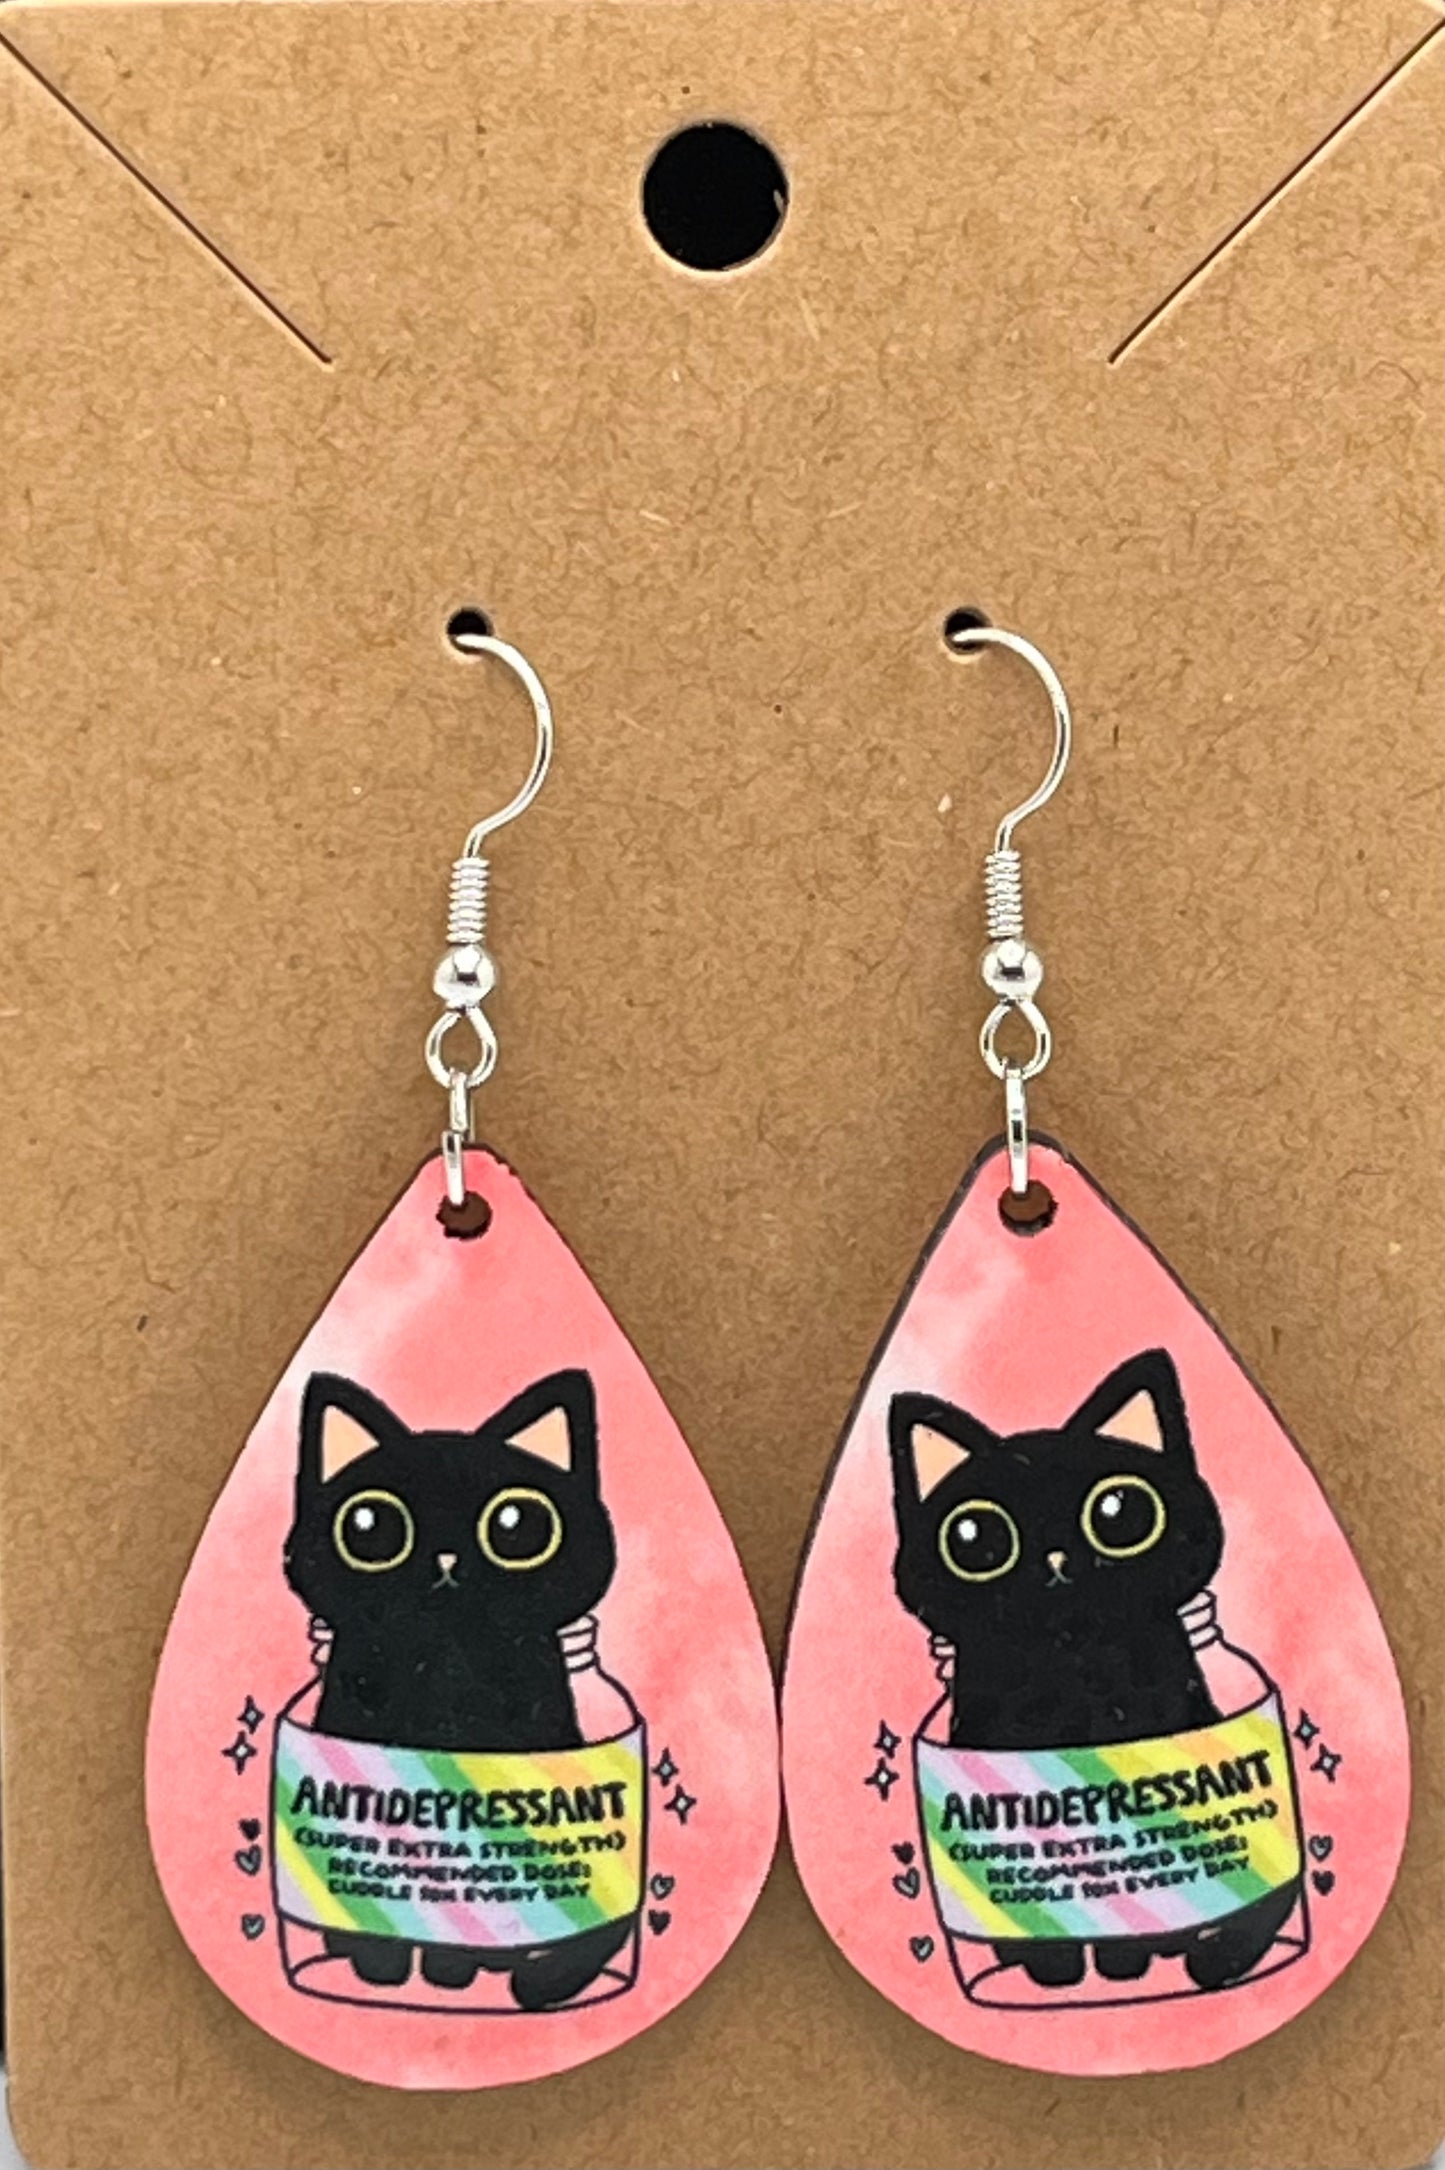 Purrfect Antidepressant-Ear Rings